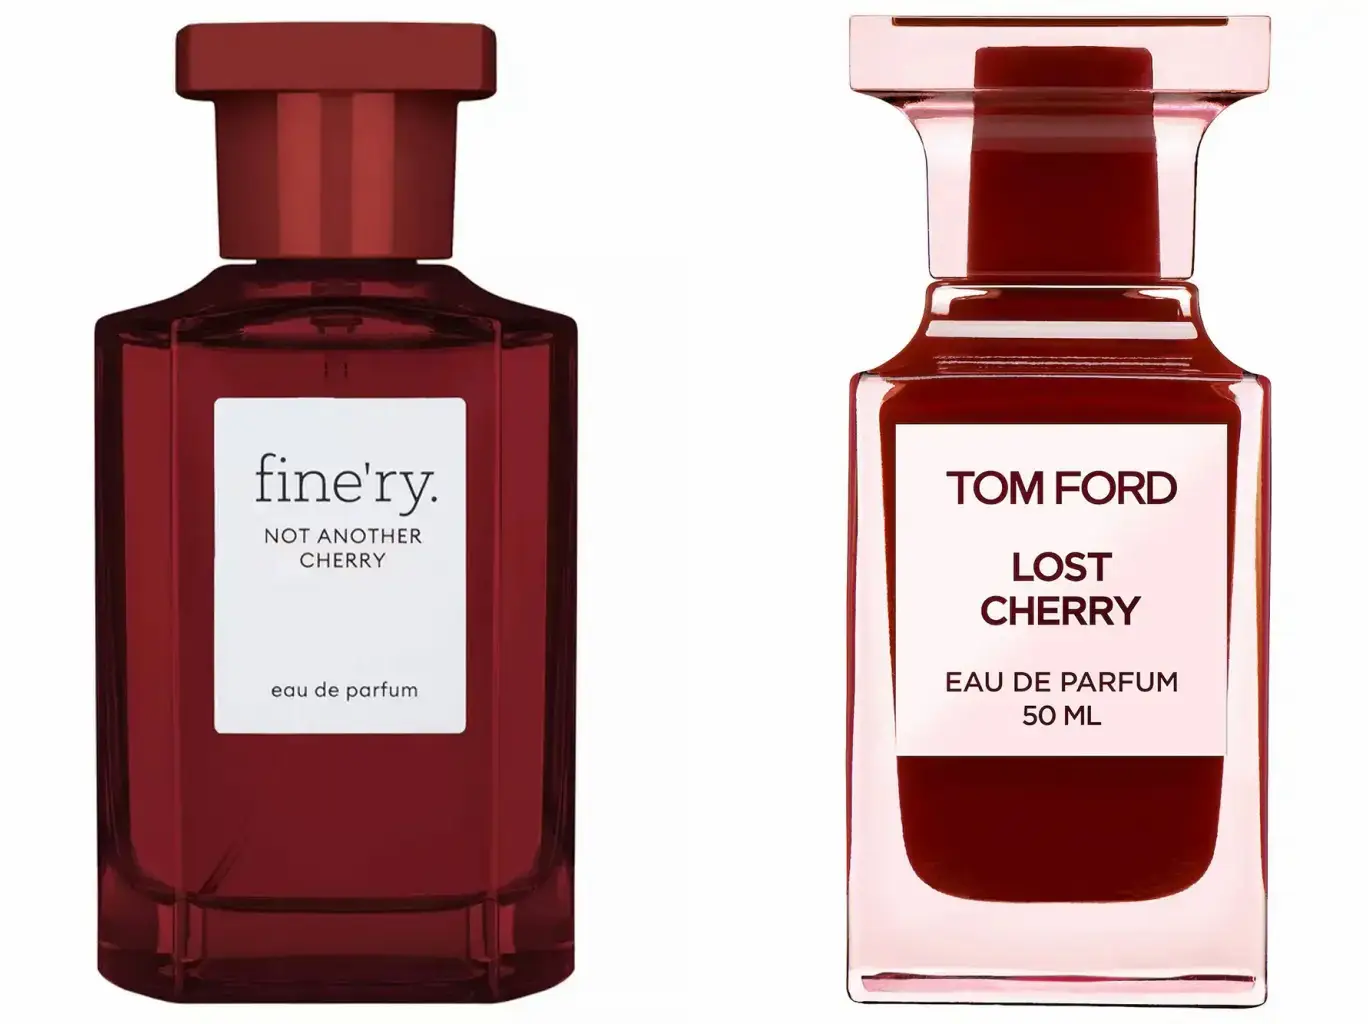 Ombre Nomade by Louis Vuitton and Lost Cherry by Tom Ford! What a